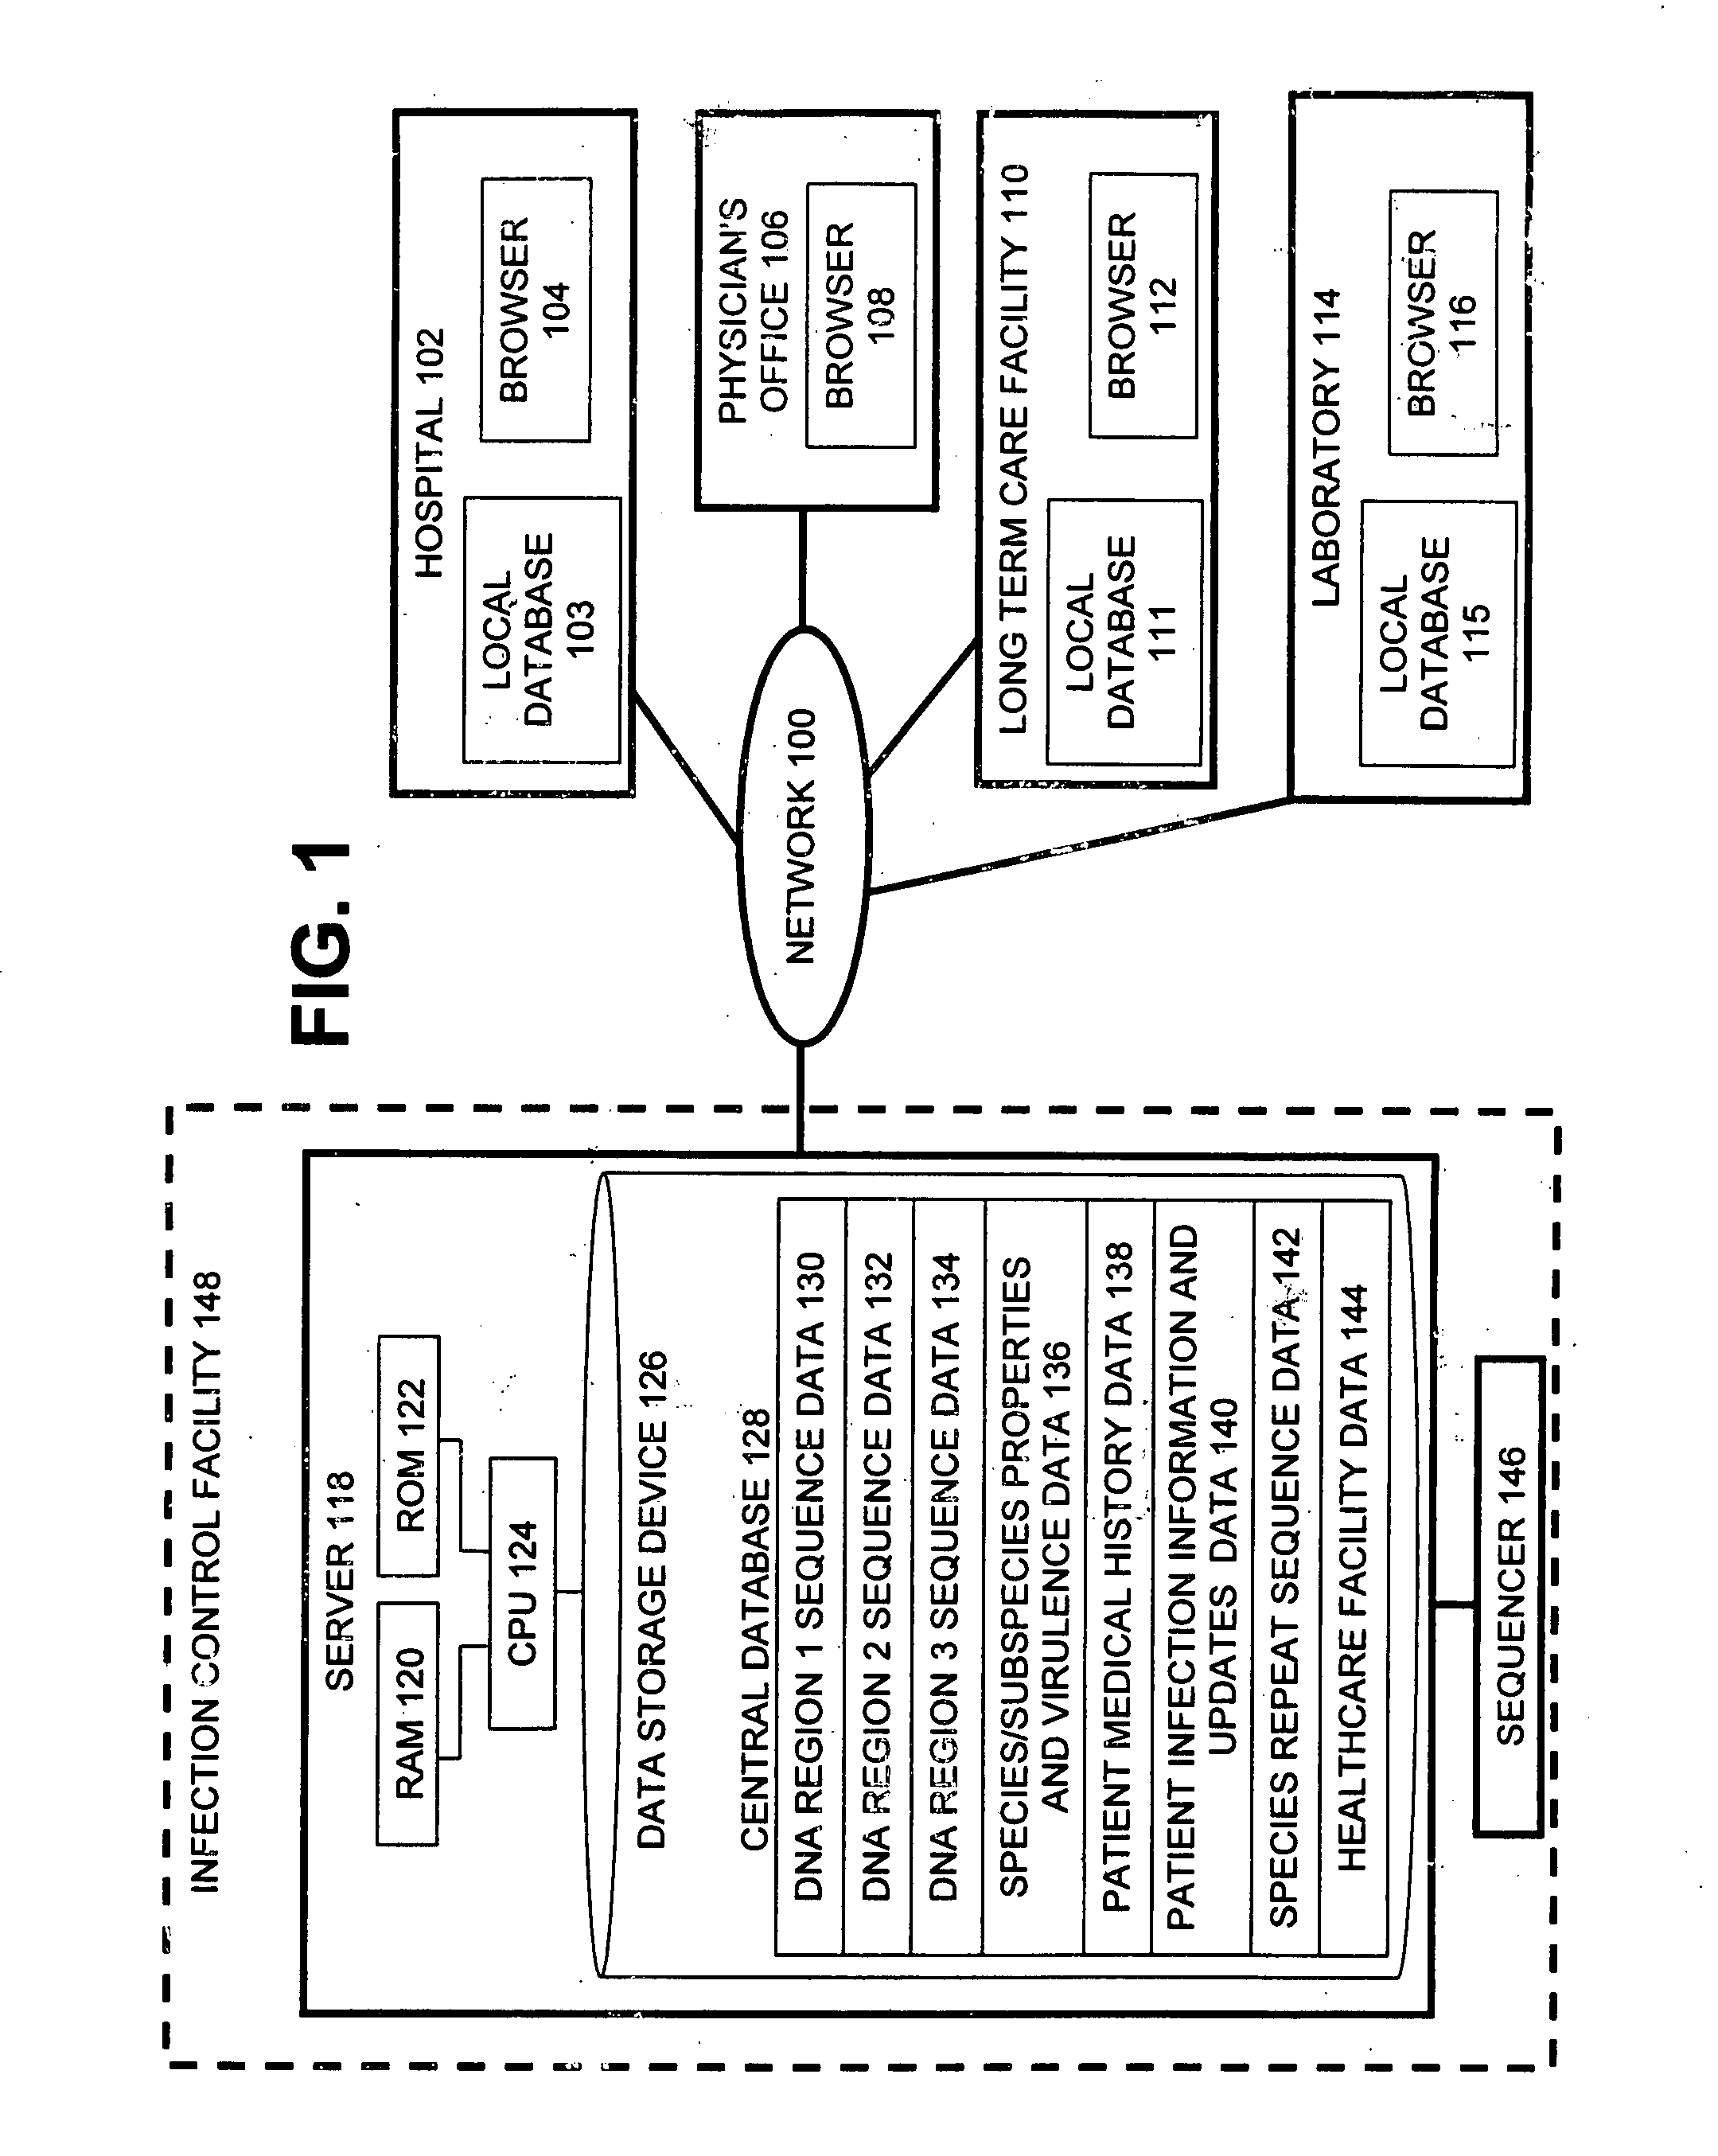 System and method for tracking and controlling infections